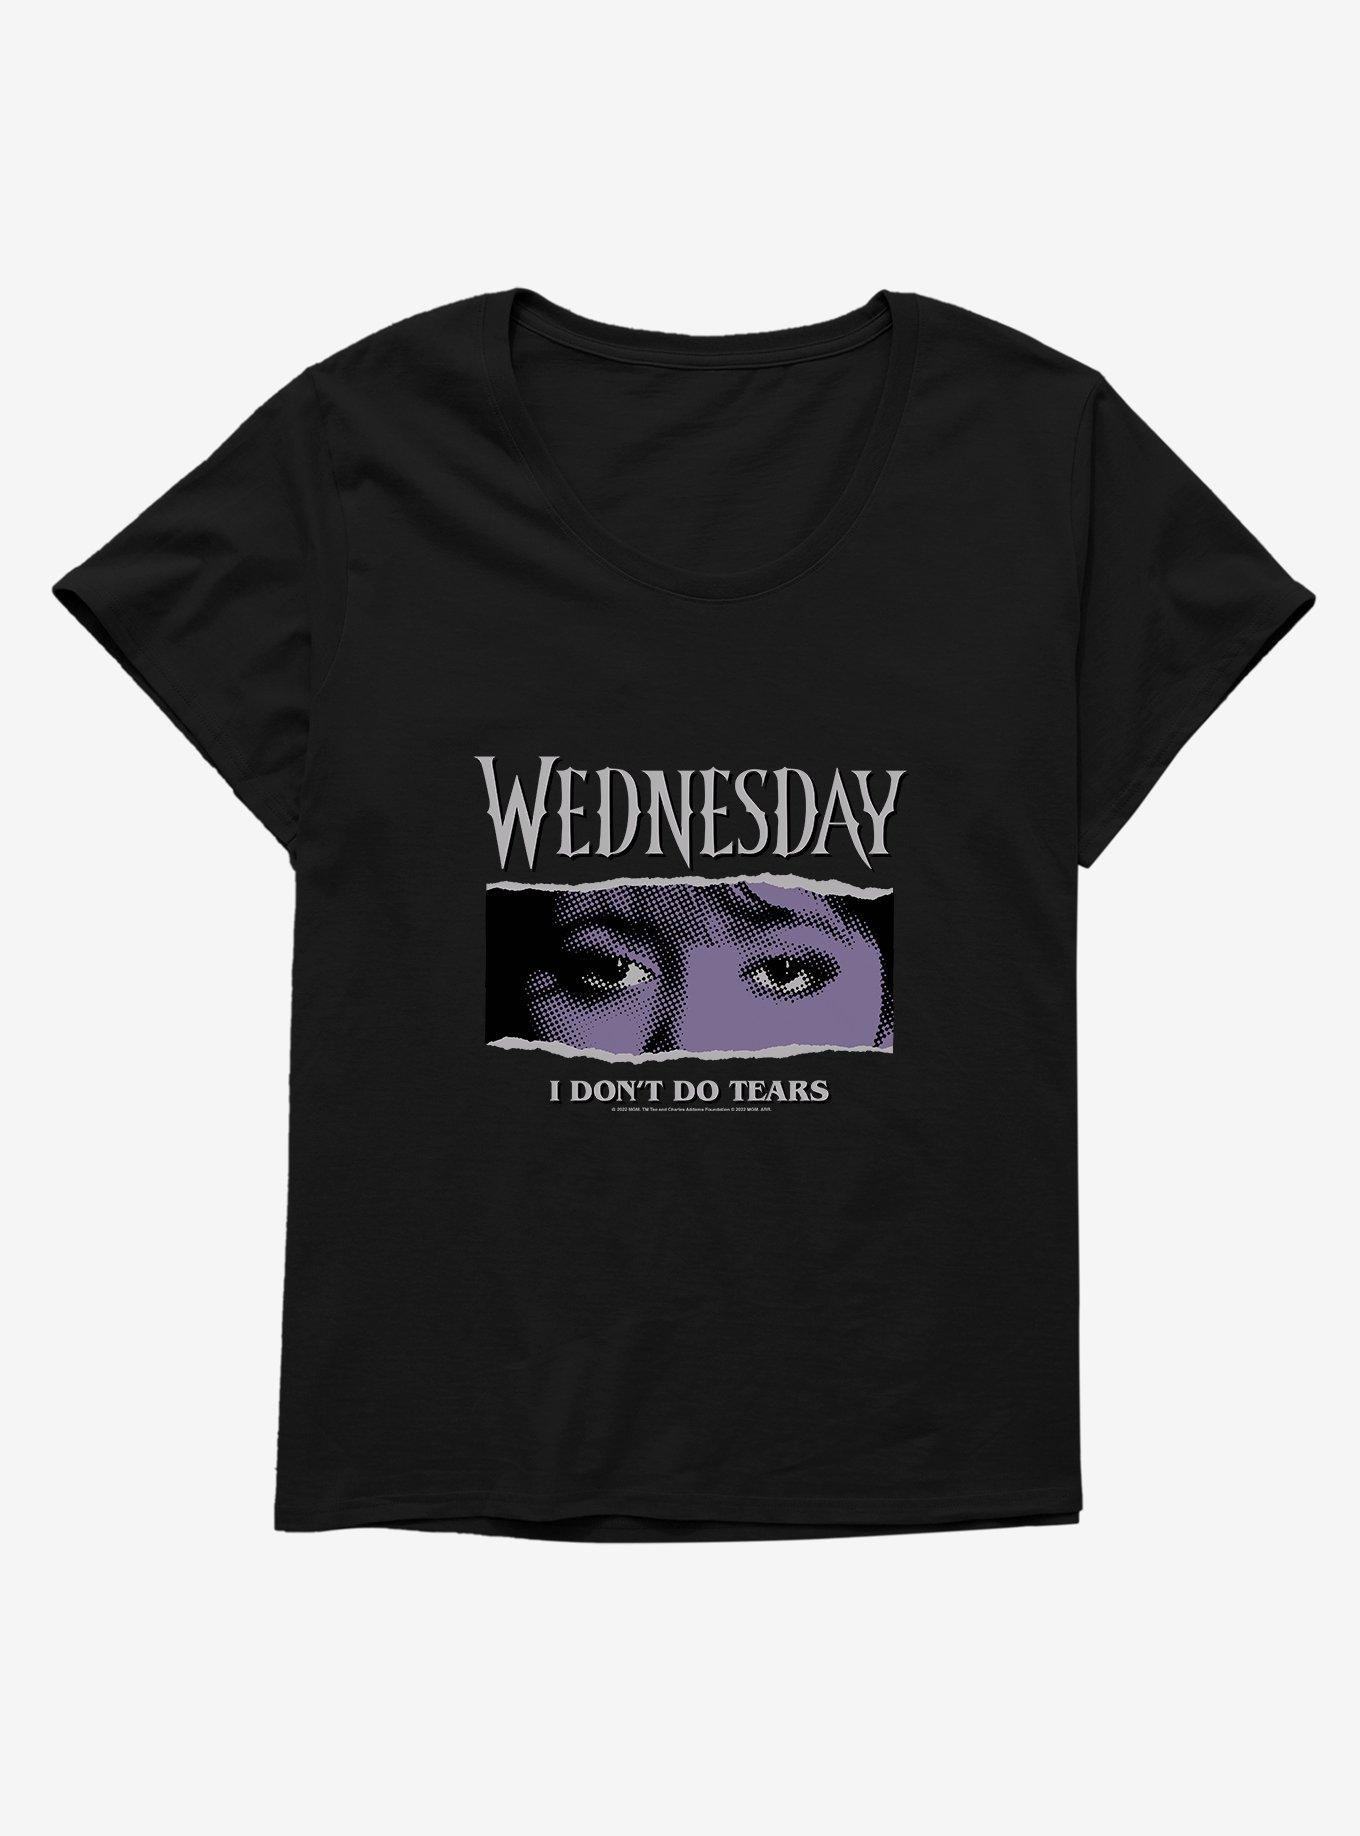 Wednesday Eyes Don't Do Tears Womens T-Shirt Plus Size, BLACK, hi-res